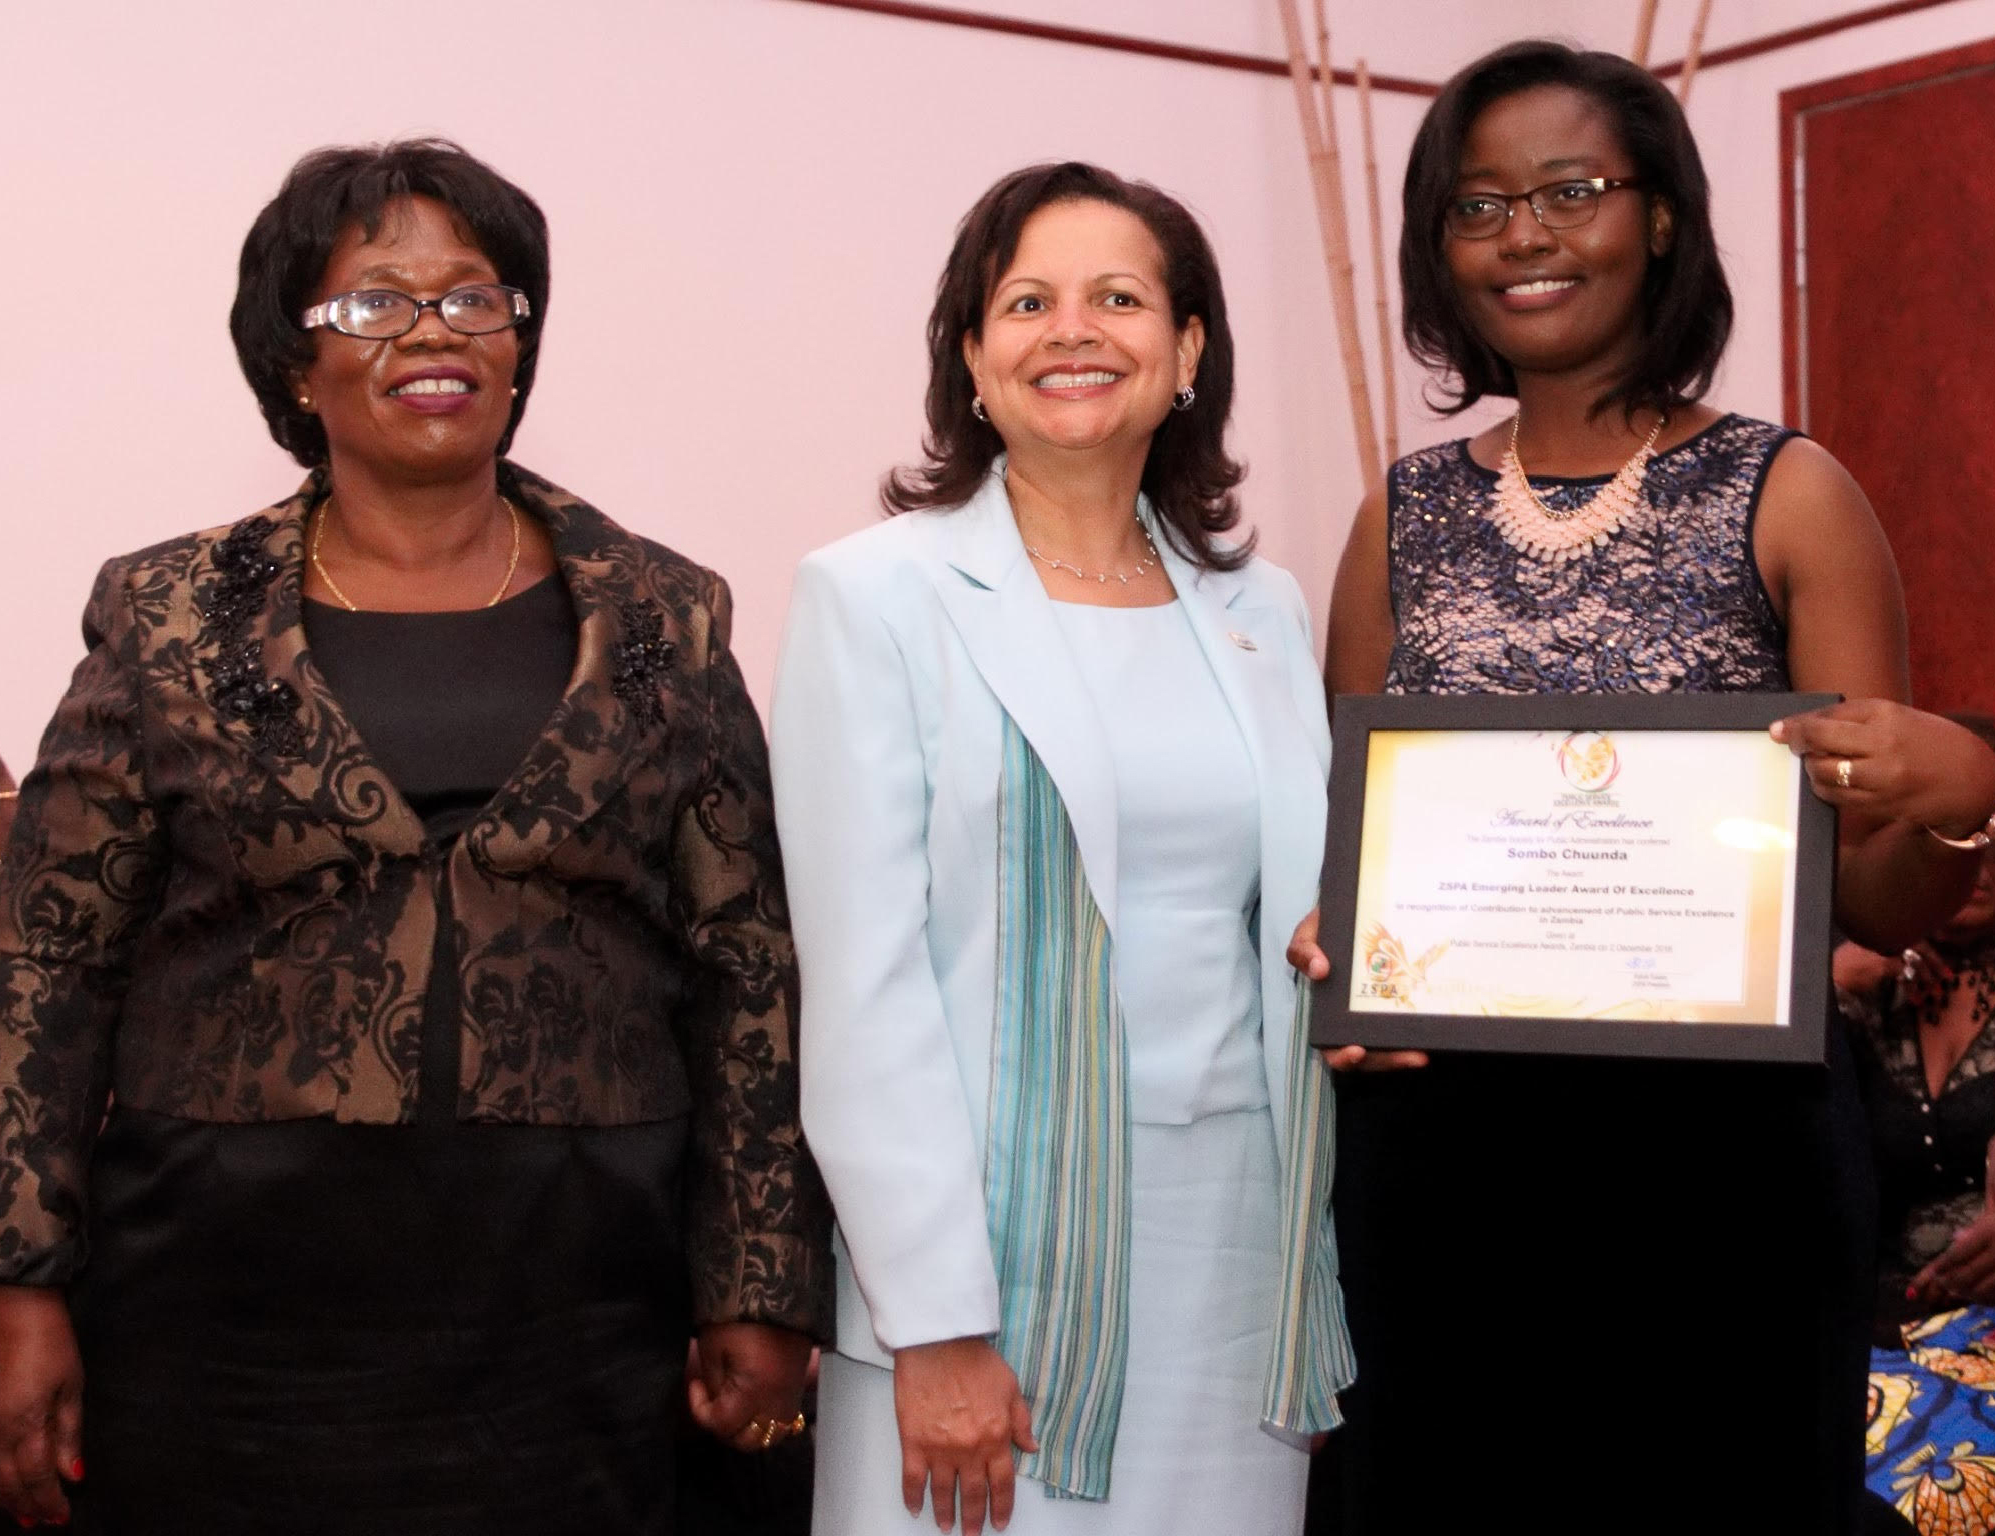 Sombo Chunda received the Young Public Service Leader Award at a dinner and awards ceremony held in Lukasa on December 5. The award was presented by Zambia’s Vice President Inonge Wina (left) and Wilder School Professor and President of the American Society of Public Administration, Susan Gooden, Ph.D.(center).